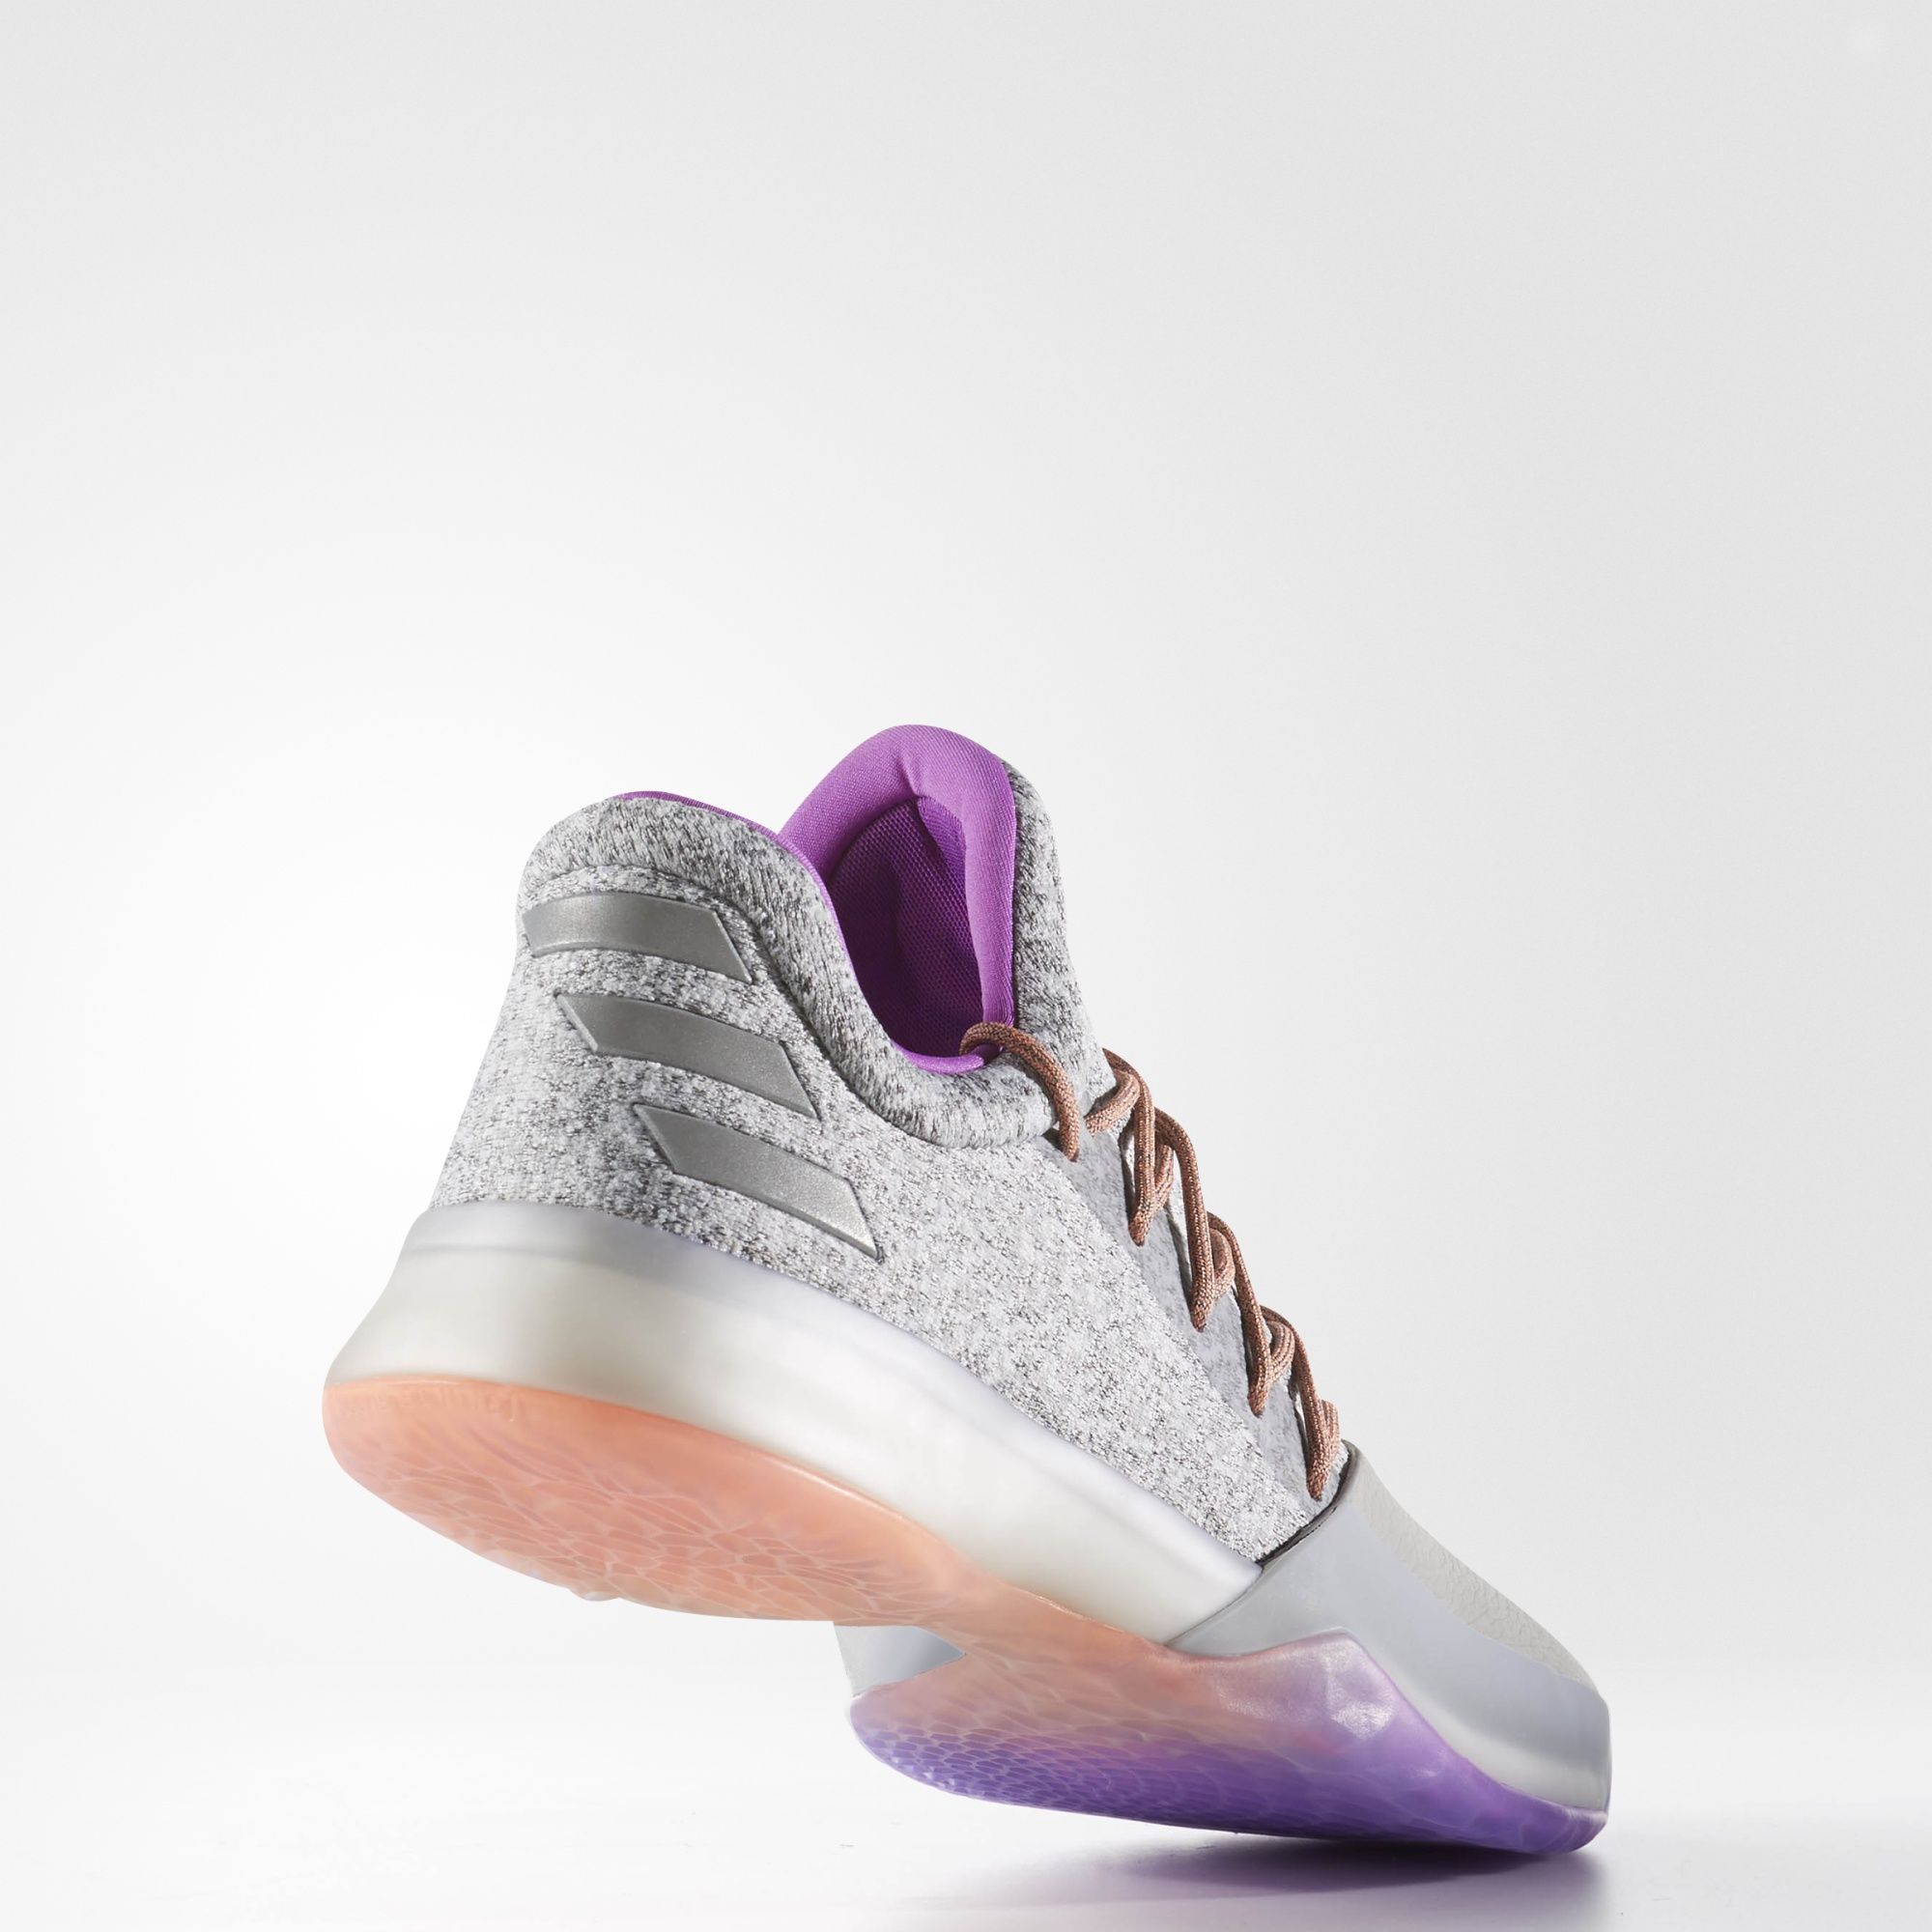 Finally, the adidas Harden Vol. 1 'All Star' Surfaces - WearTesters